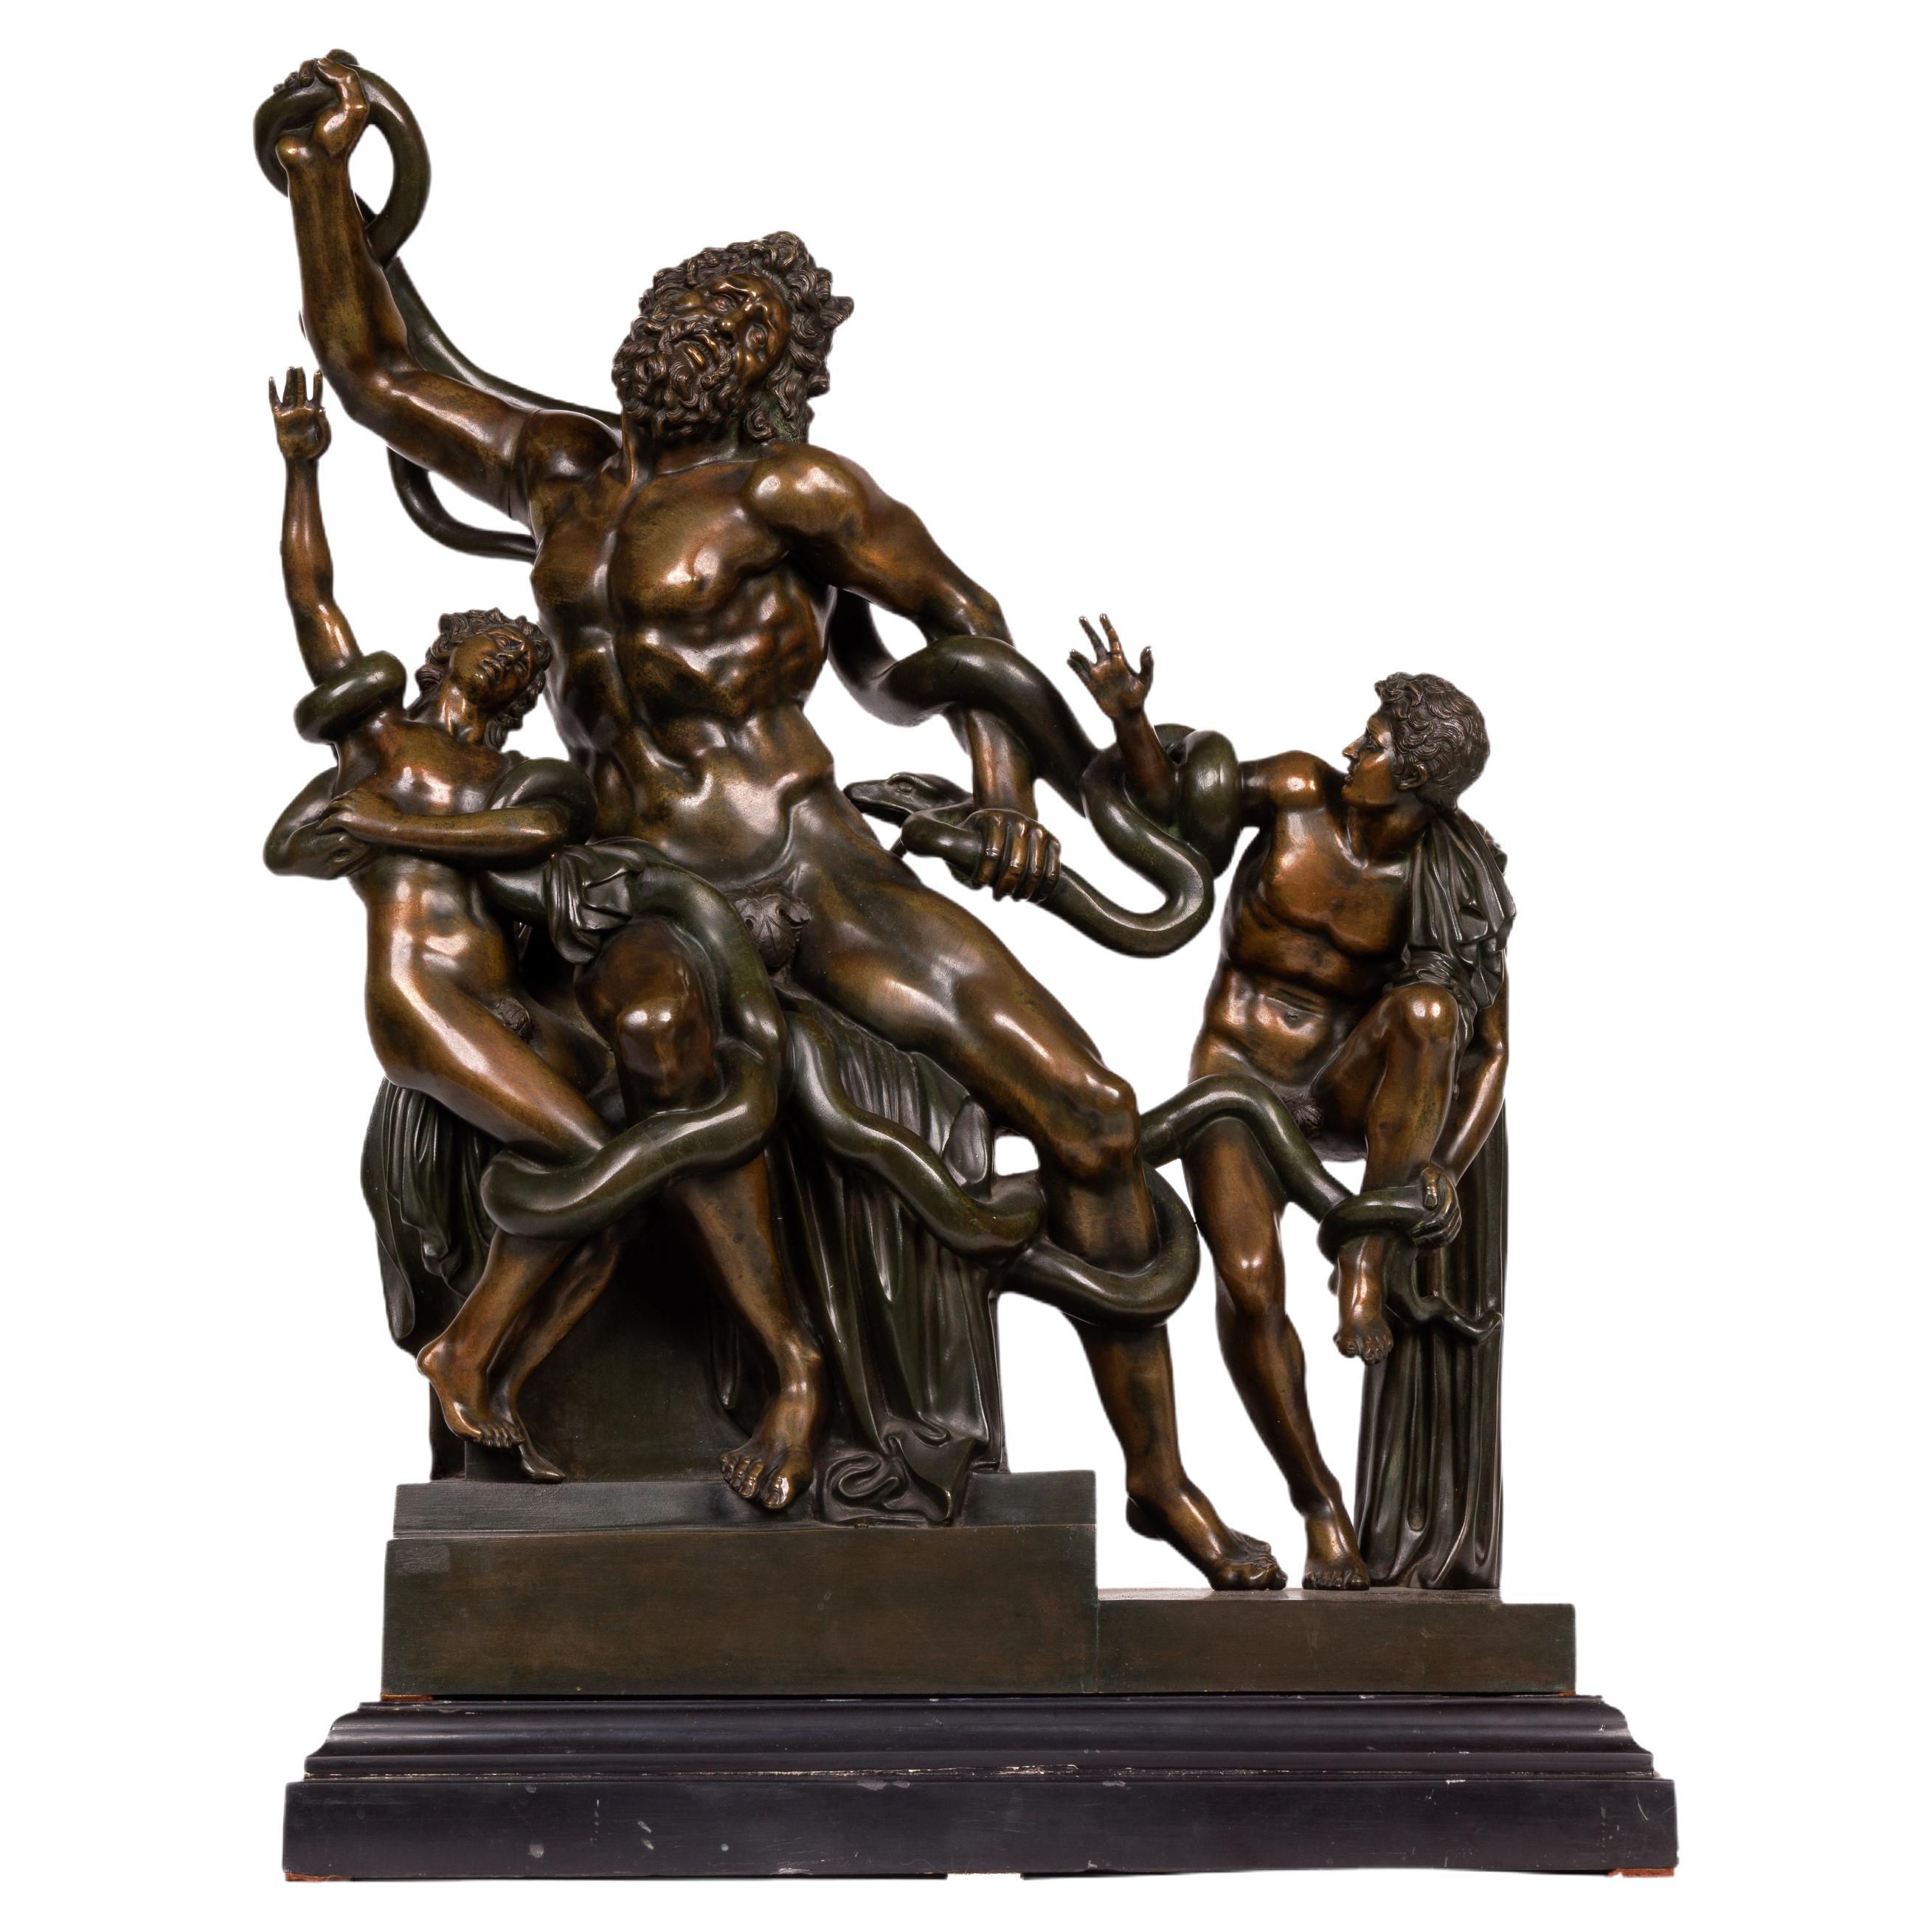 Italian Patinated Bronze Group Sculpture of Laocoon and His Sons, C. 1870